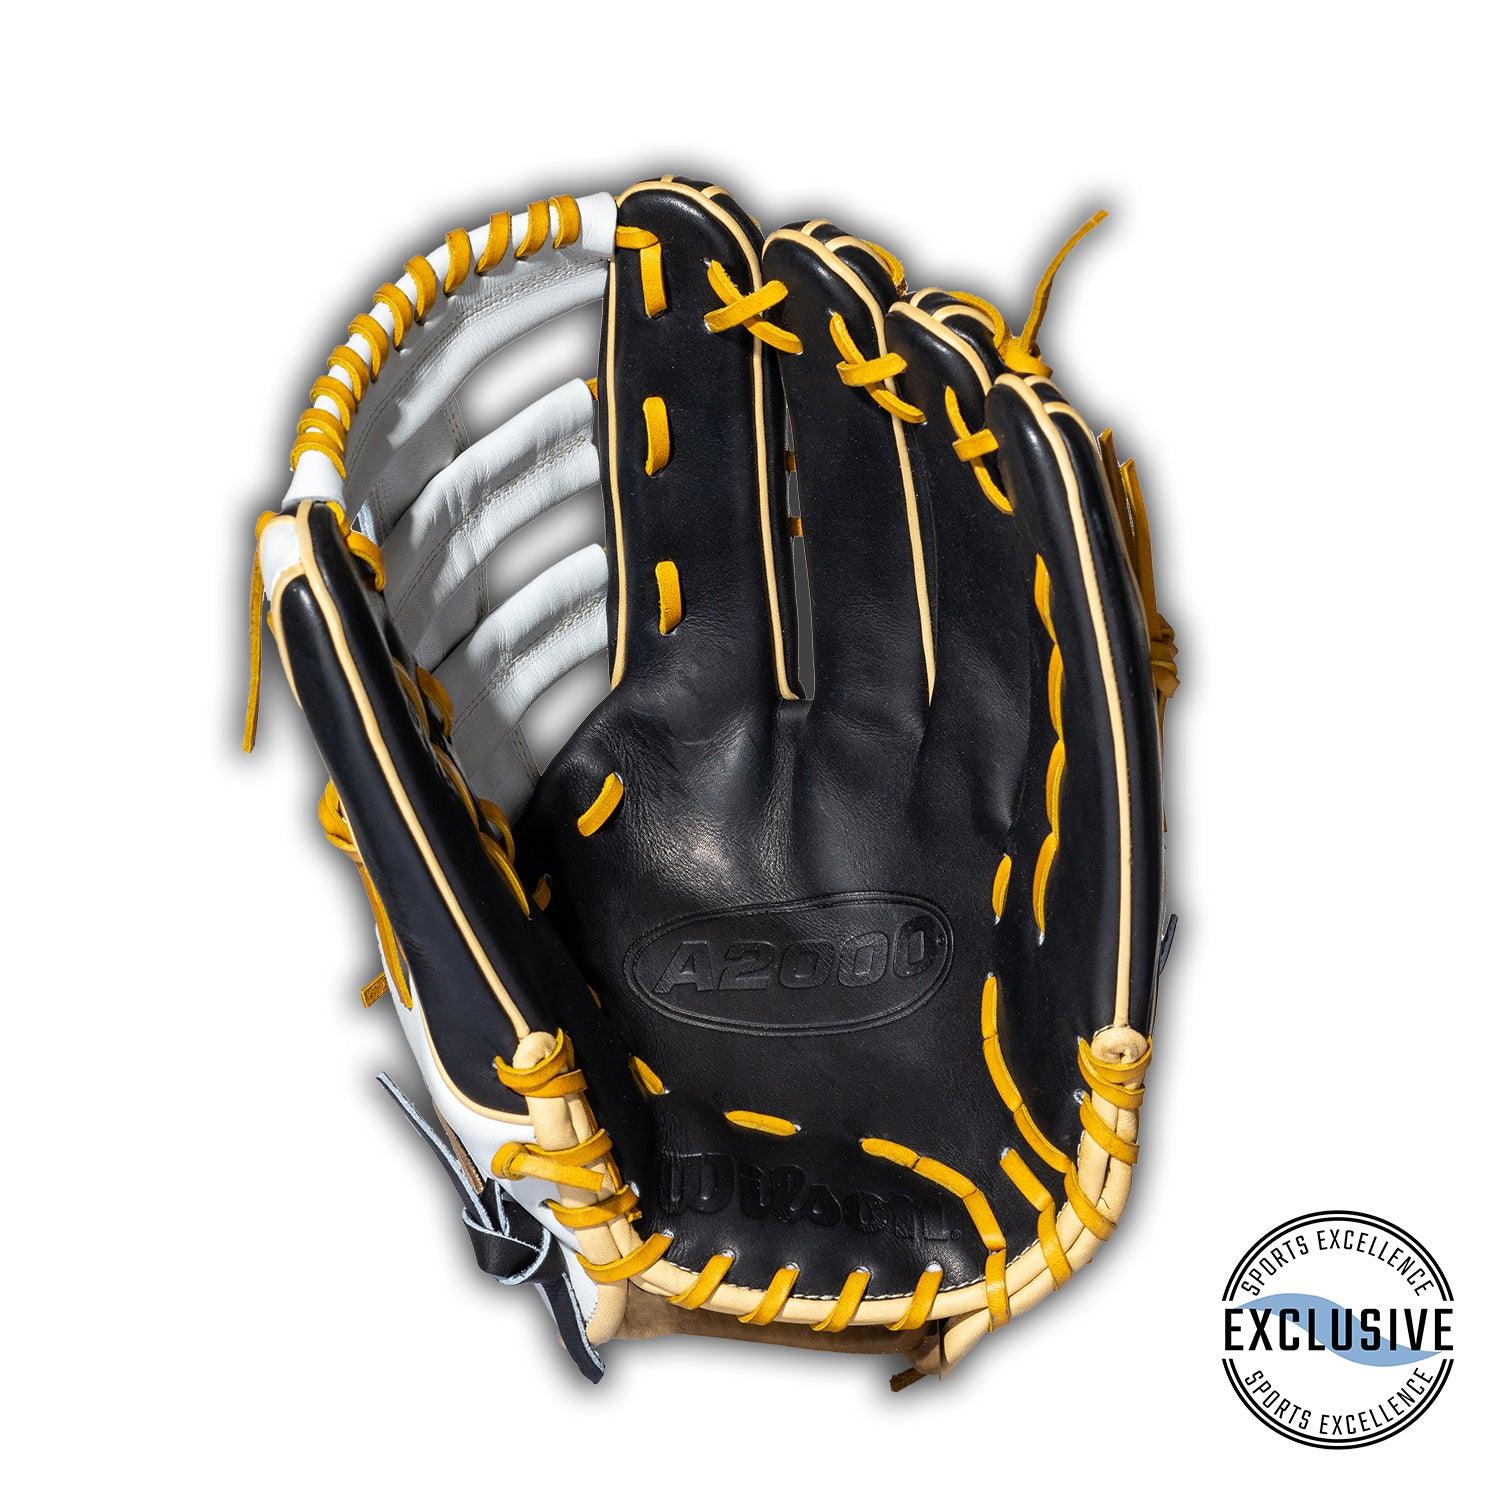 A2000 Slow Pitch 13" Glove - Sports Excellence